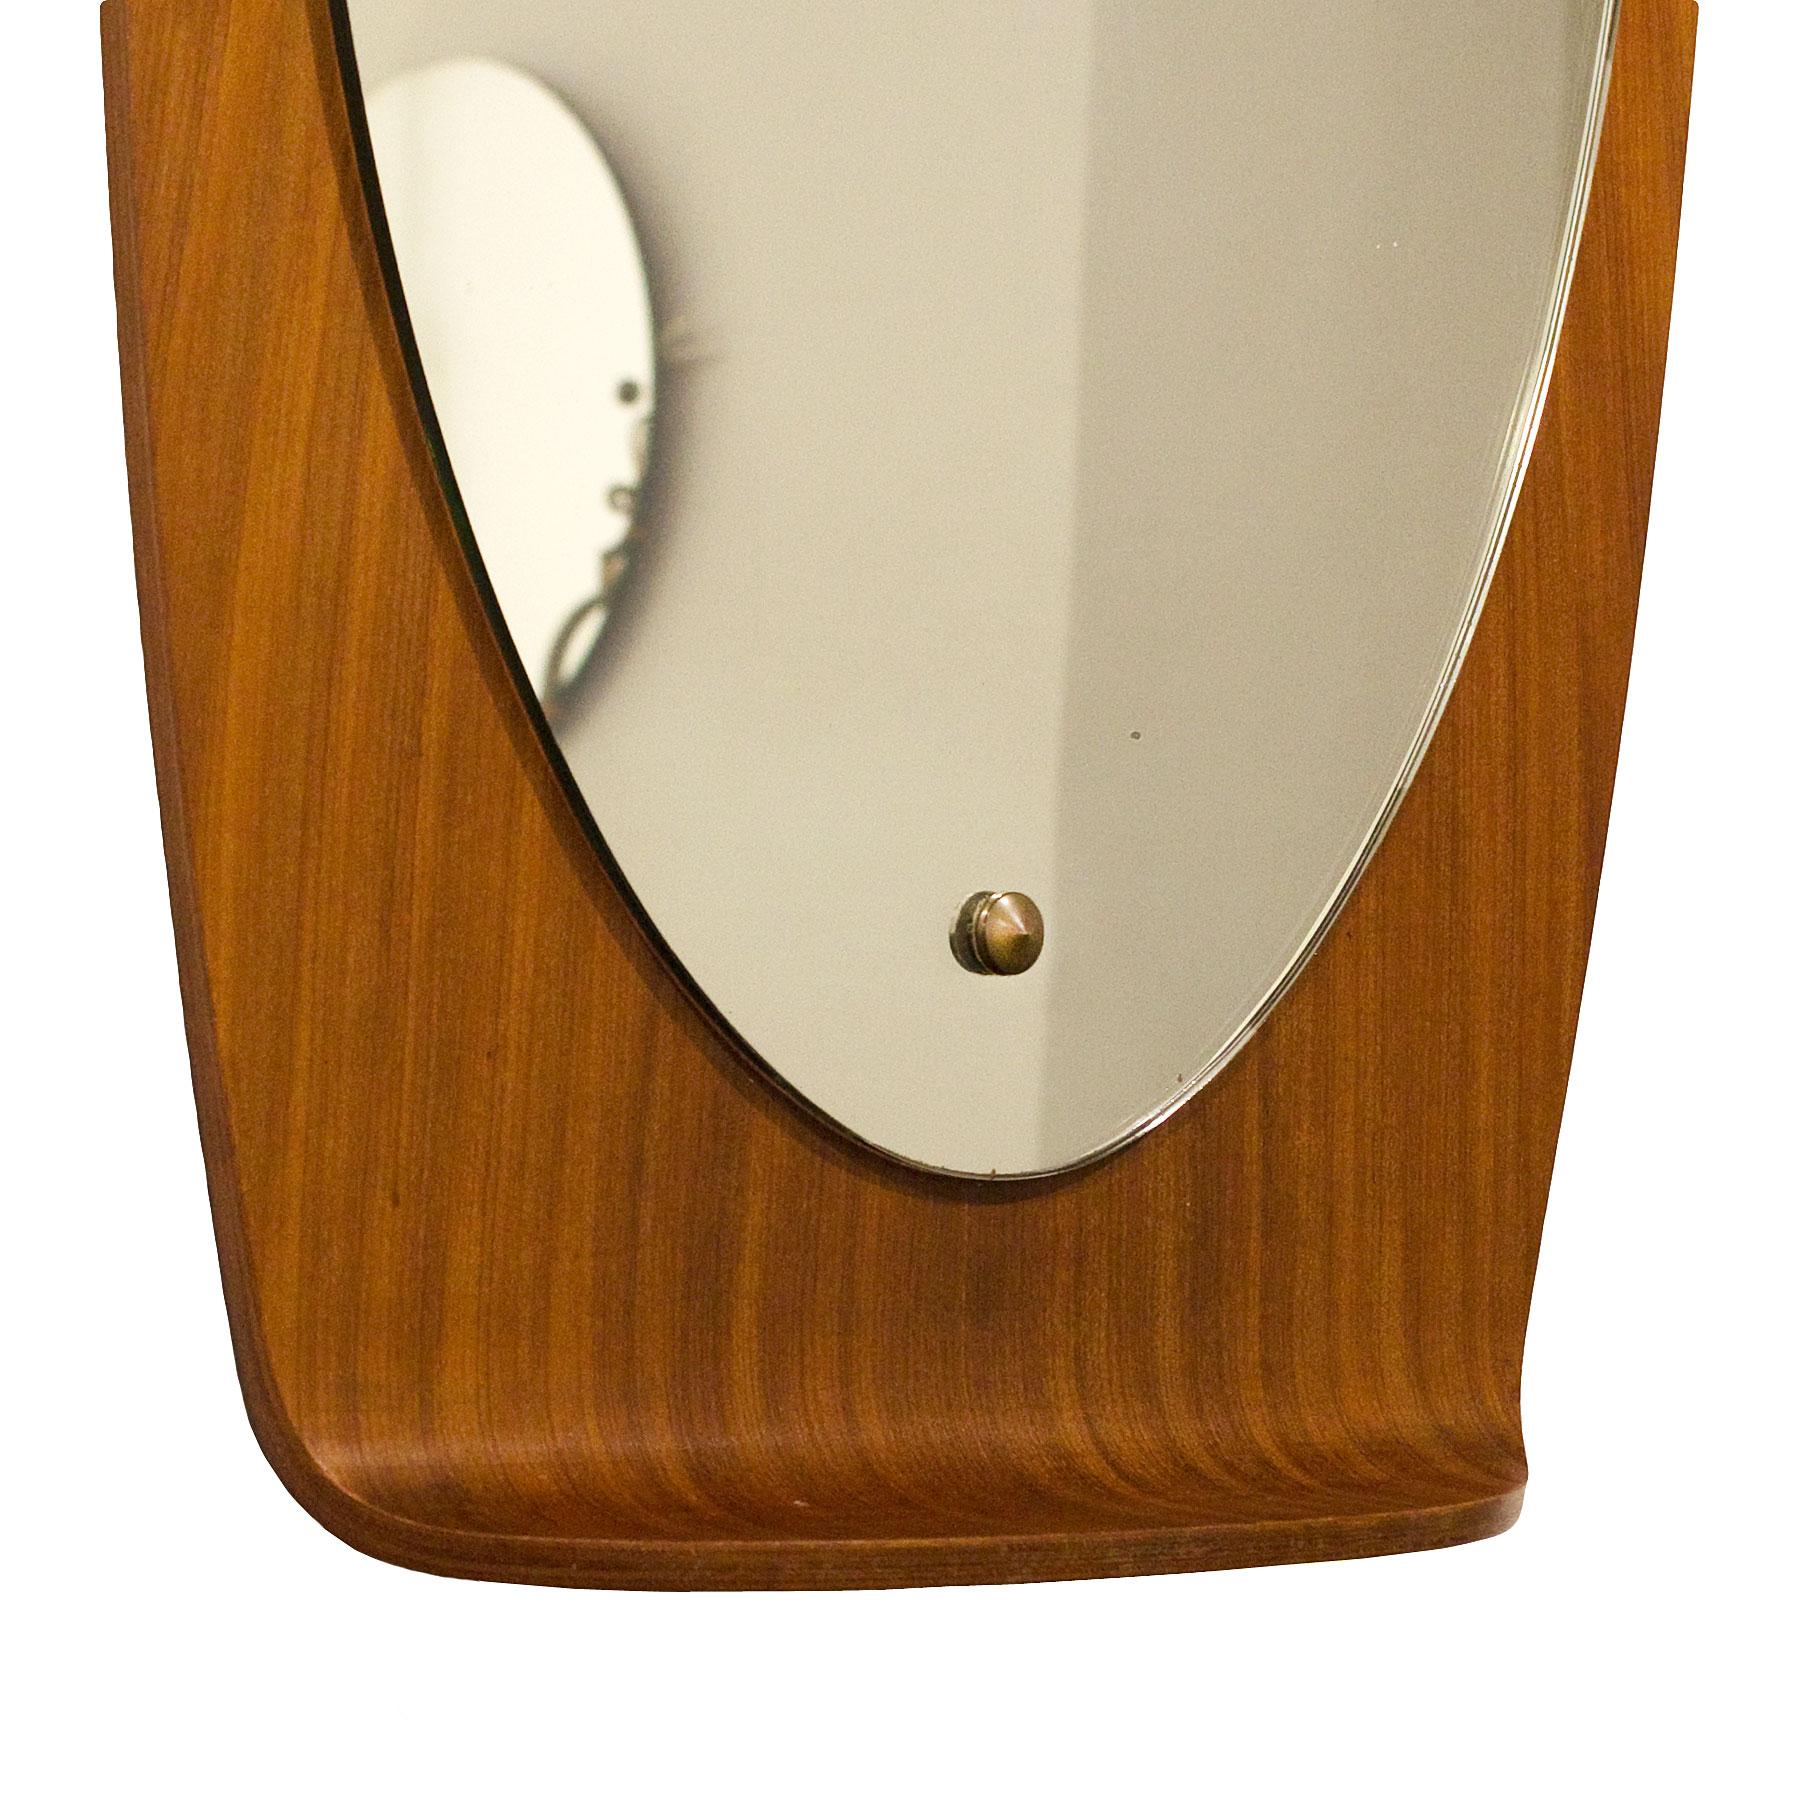 Large Mid-Century Modern Curved Mirror by Campo & Graffi, Teak, Brass - Italy In Good Condition For Sale In Girona, ES